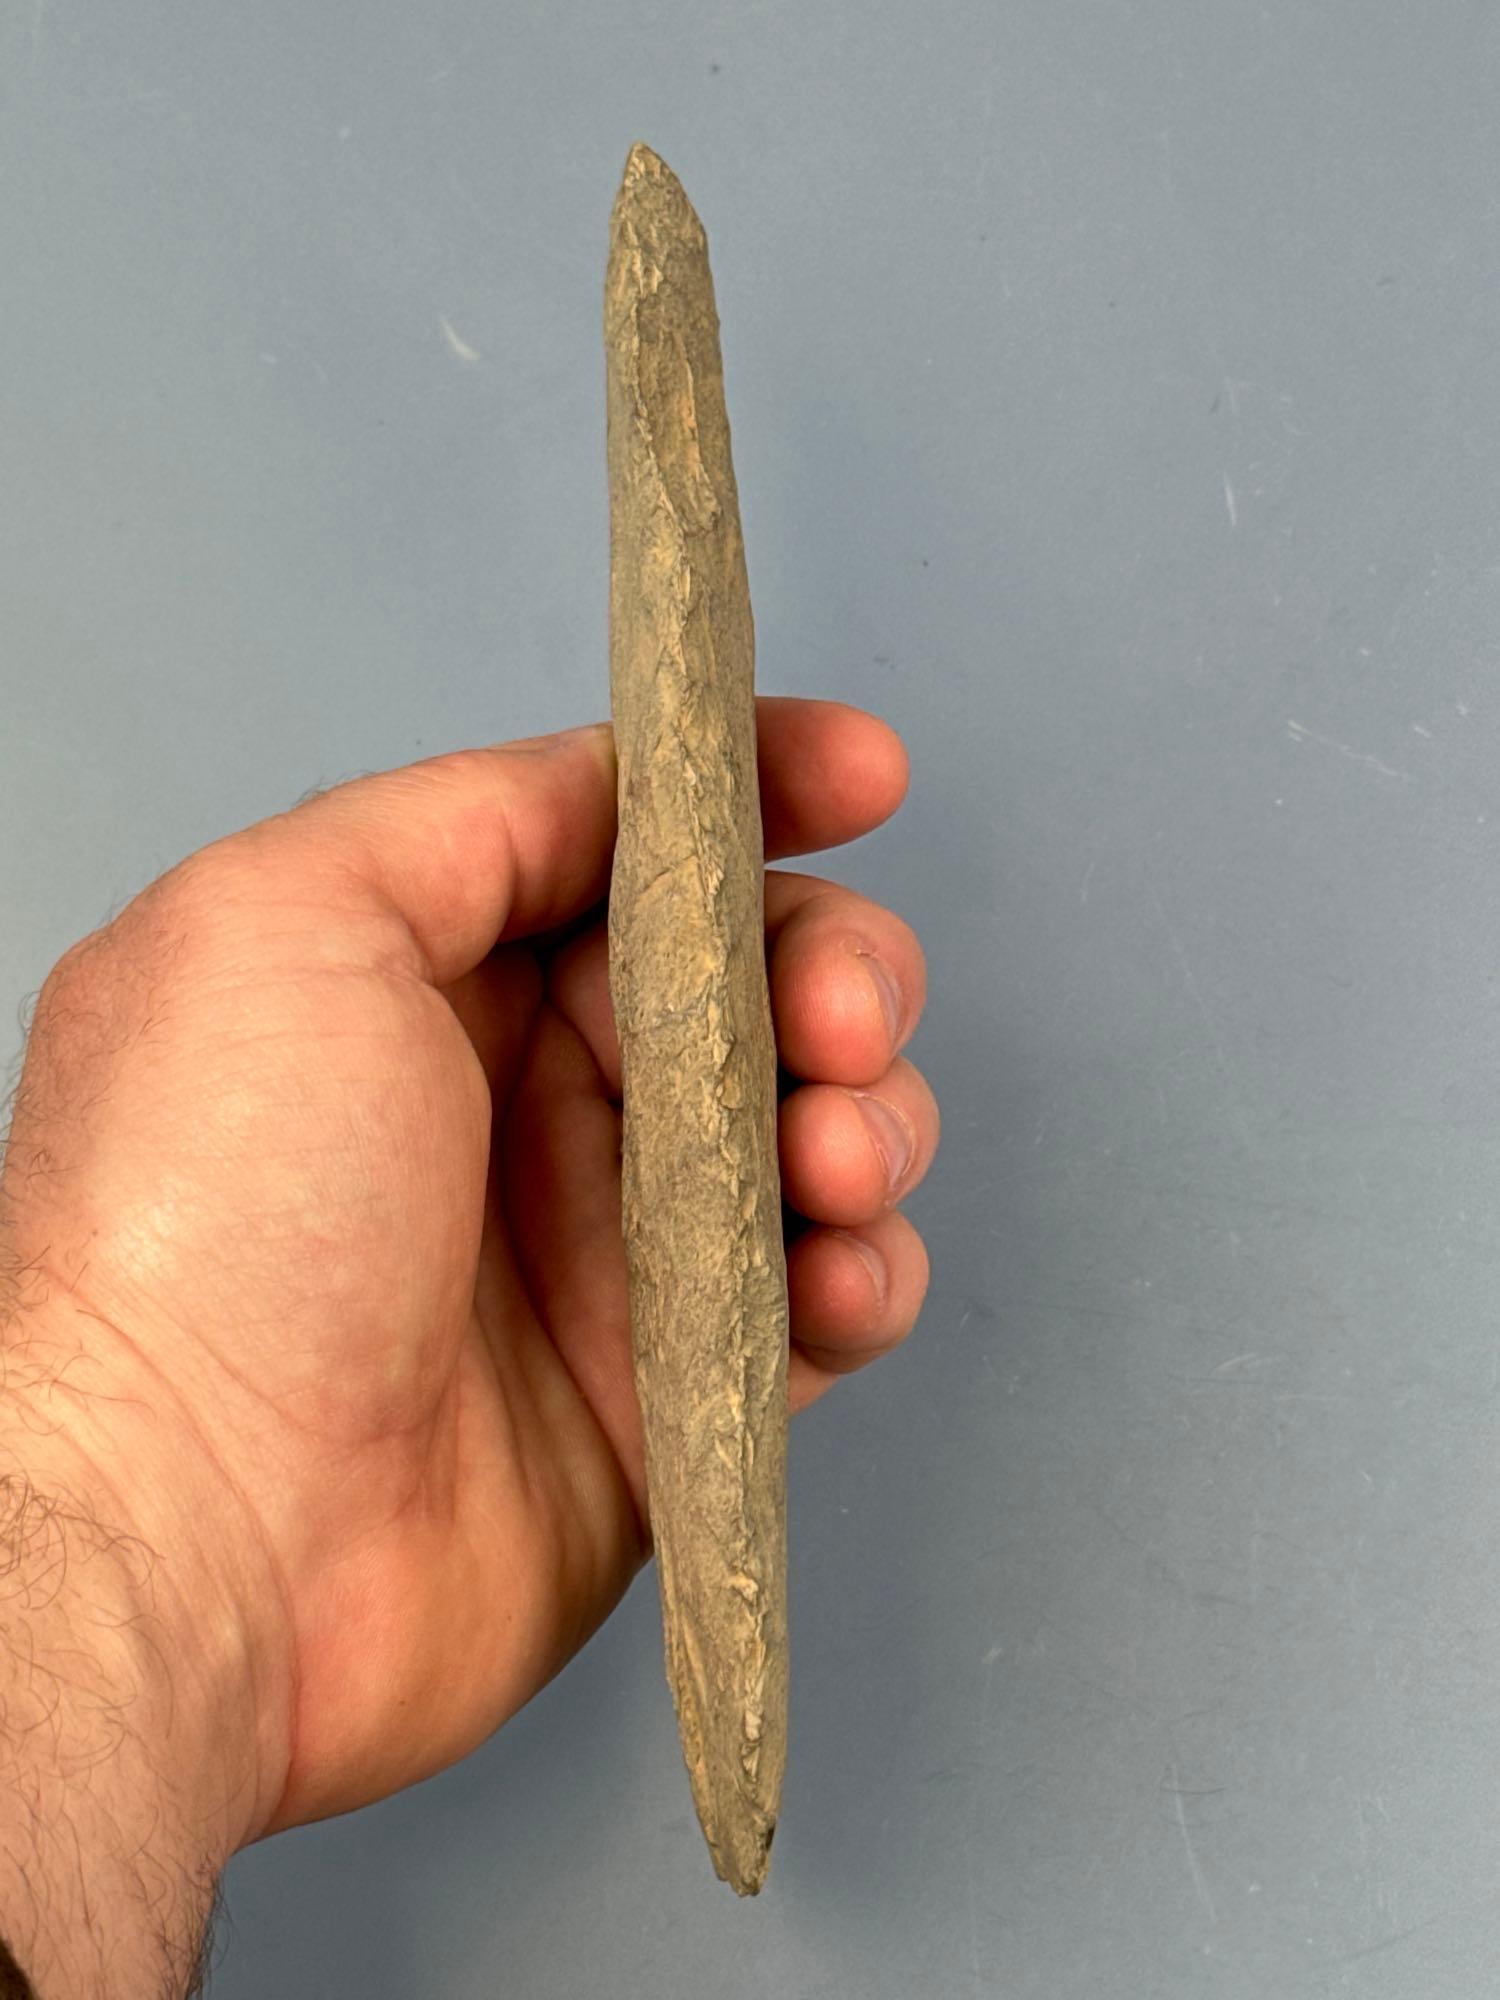 XL 7 3/4" Rhyolite Blade, HUGE, Found in PA/NJ/NY Tristate Area, Ex: Harry Mucklin, Lemaster, Ancien